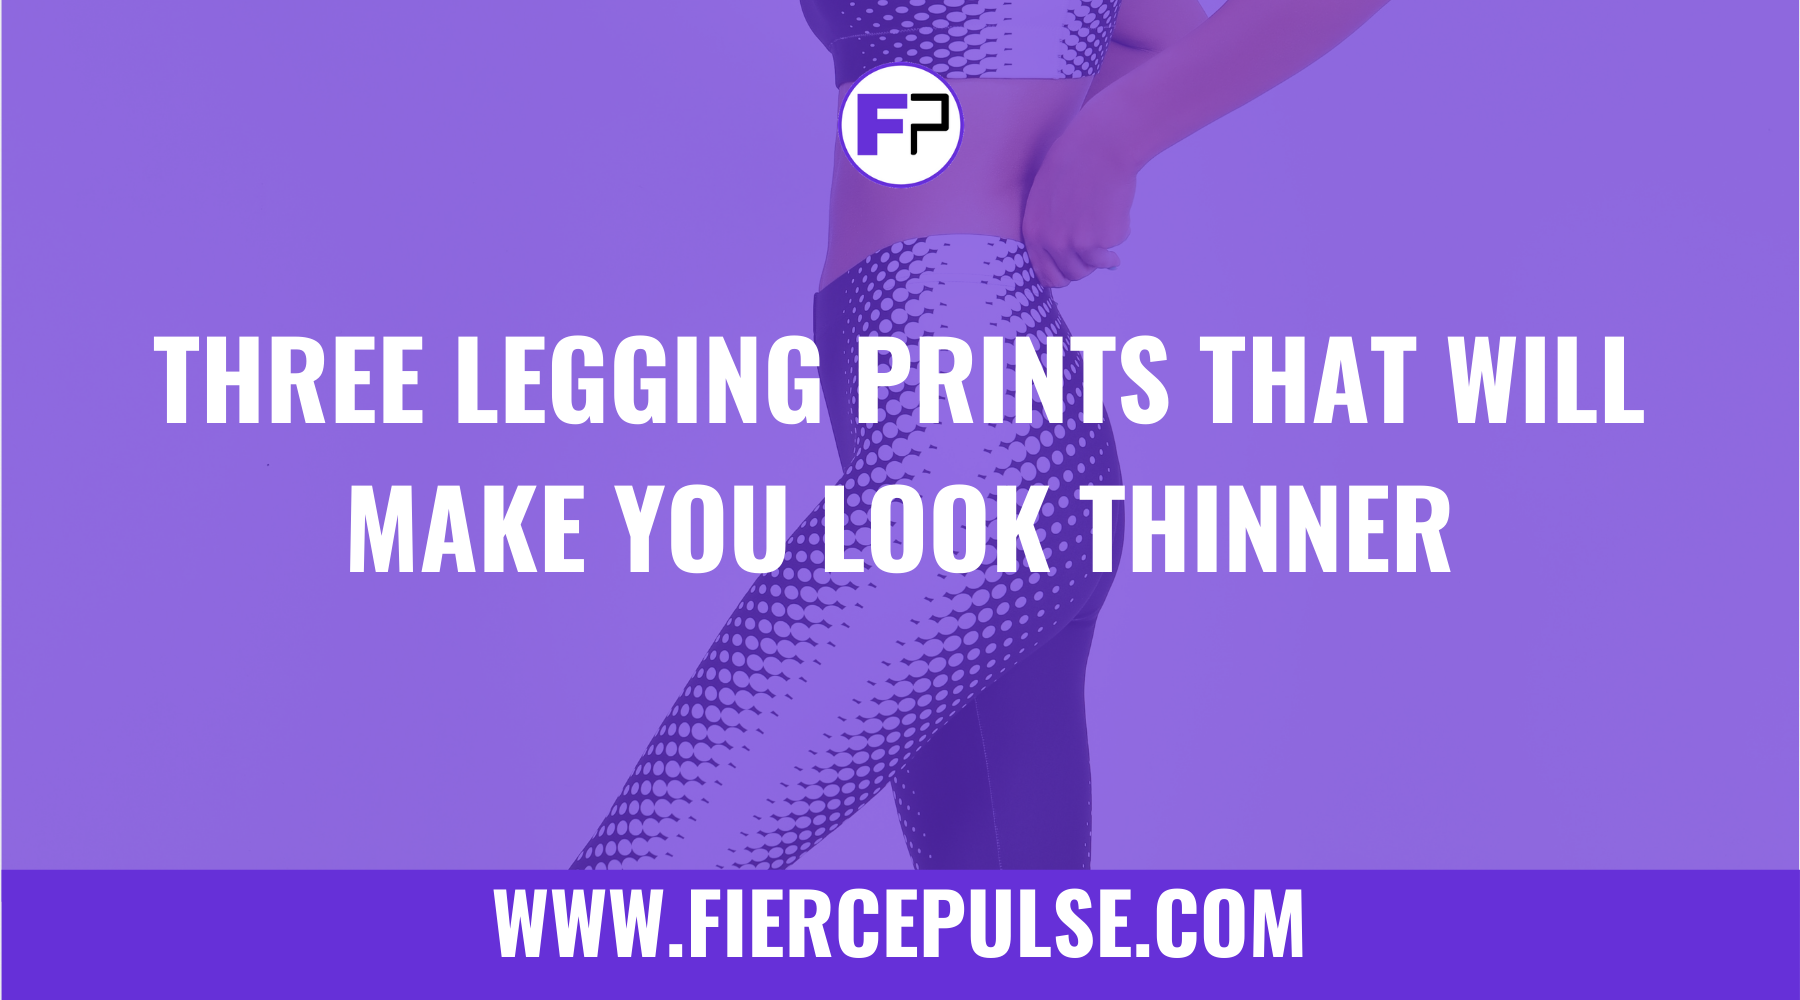 Three Legging Prints That Will Make You Look Thinner